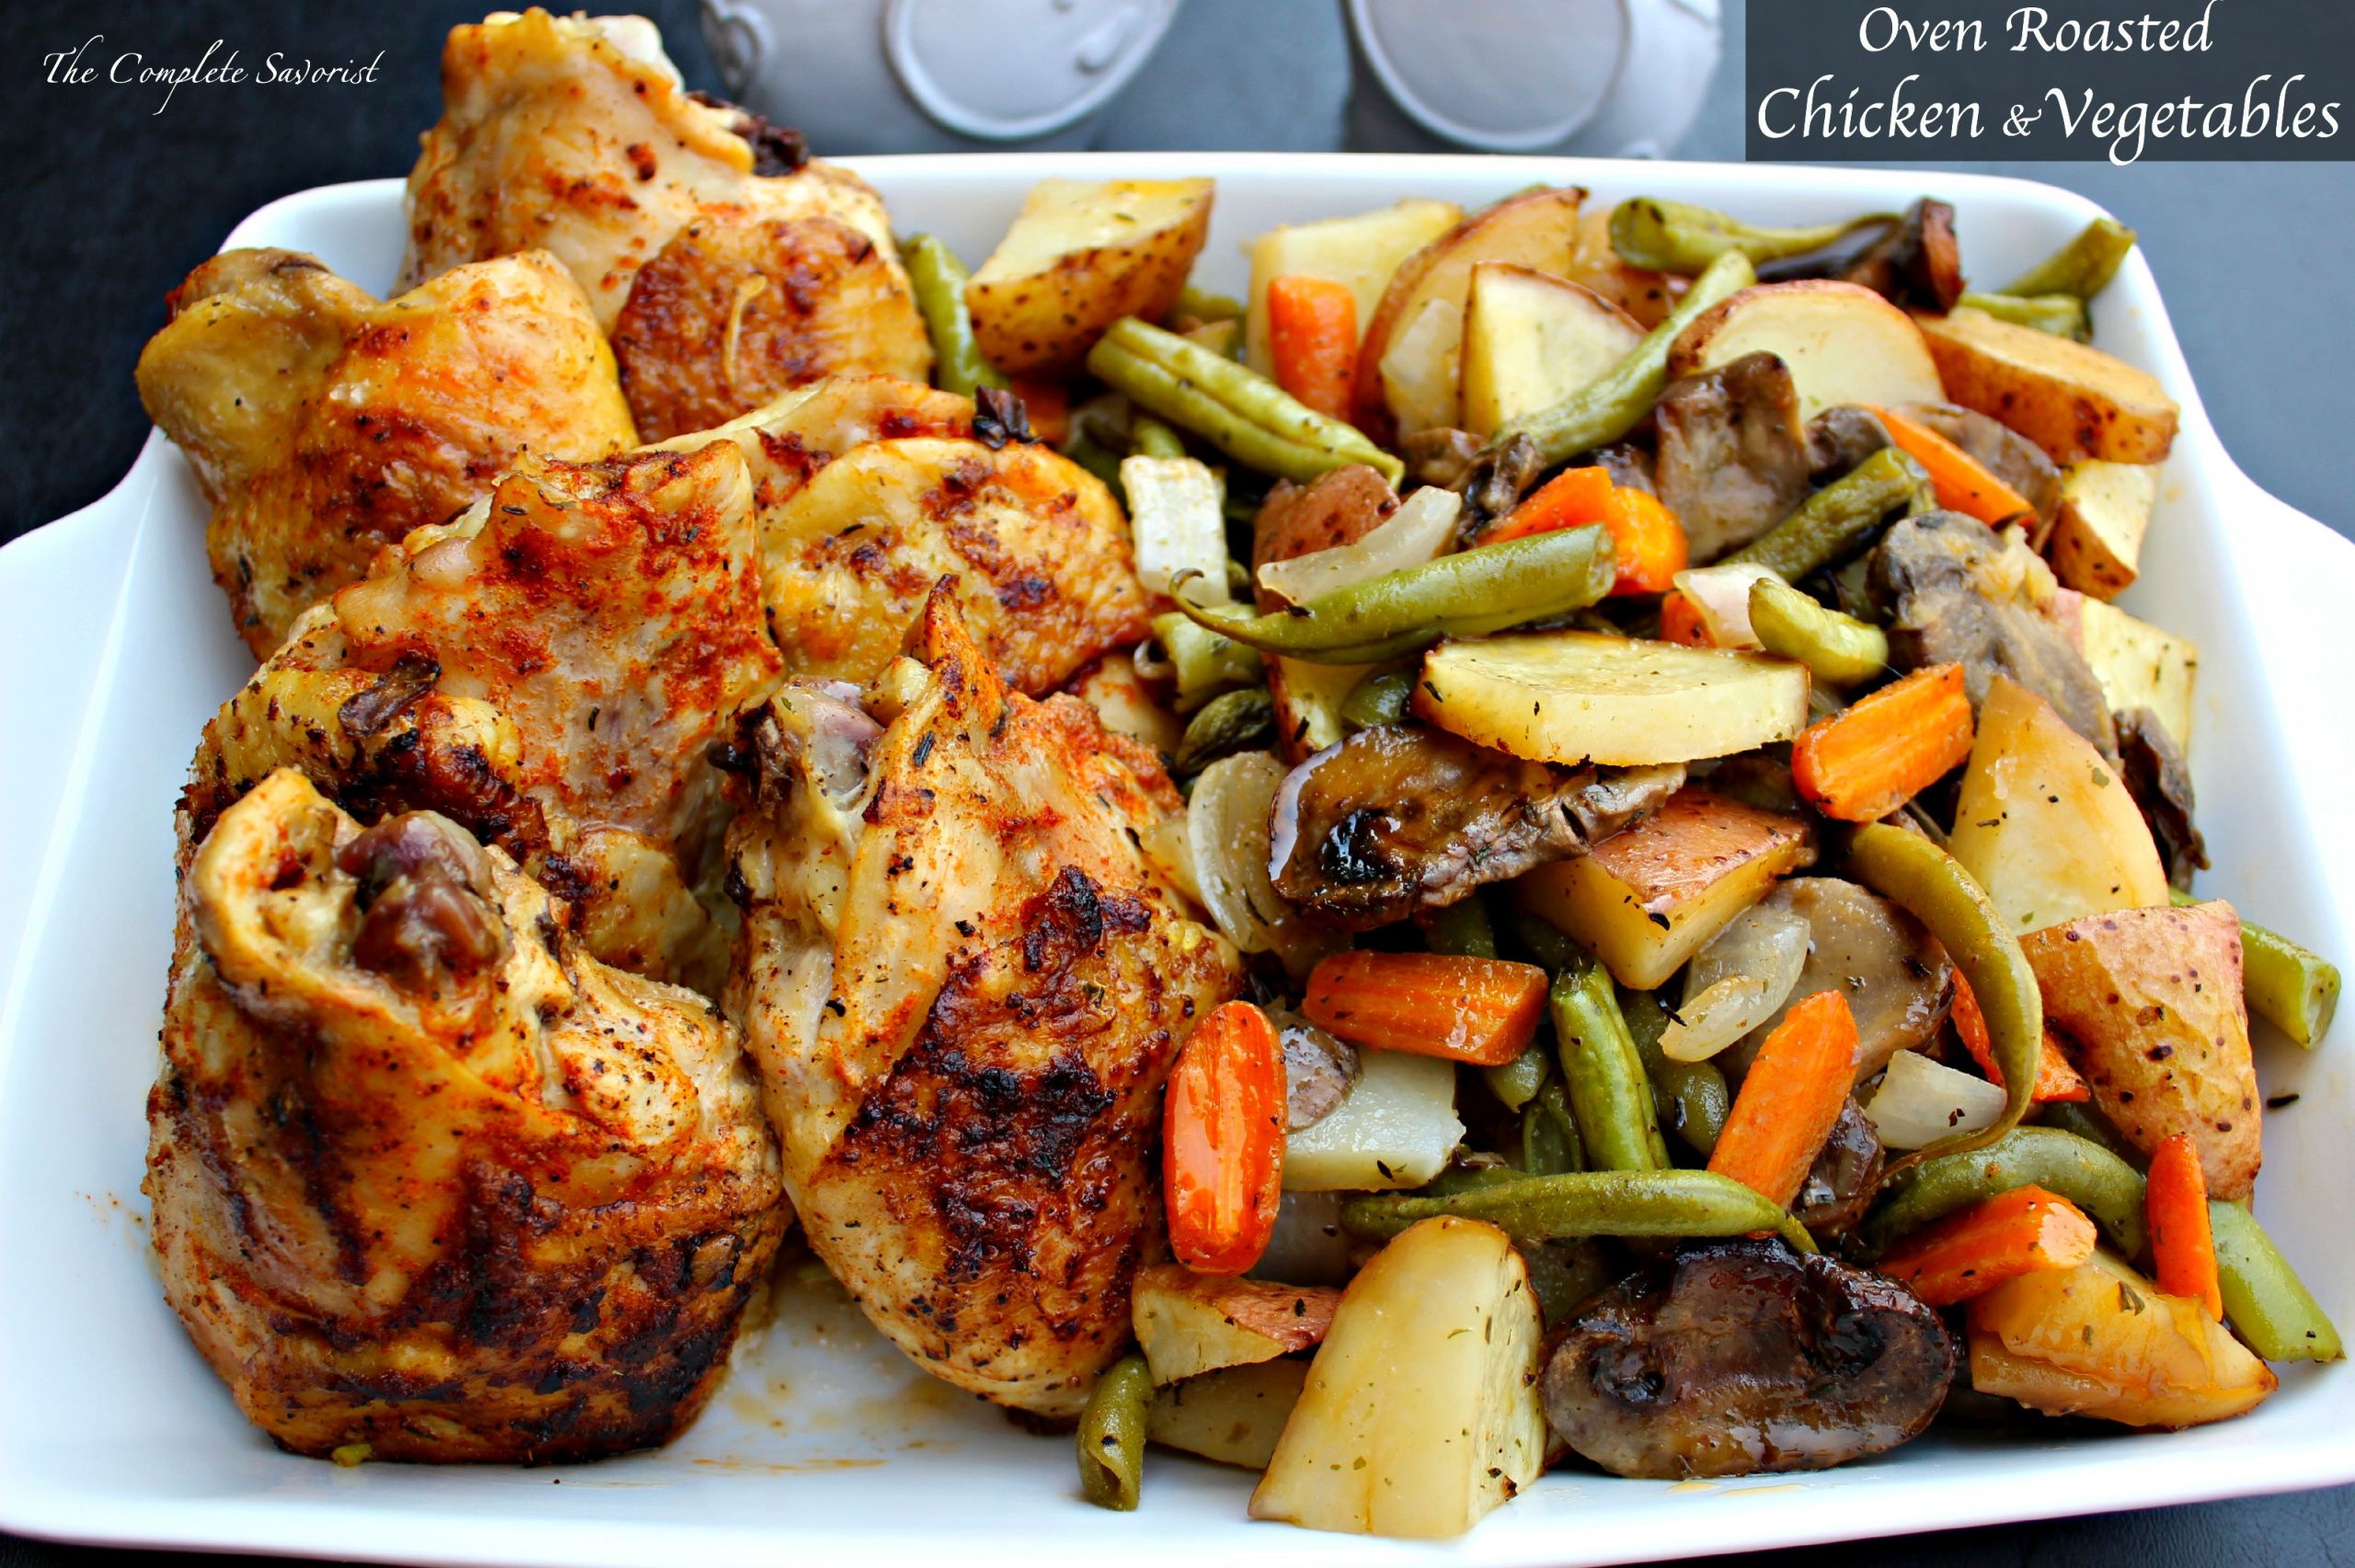 Oven Roasted Chicken And Vegetables
 Oven Roasted Chicken and Ve ables The plete Savorist